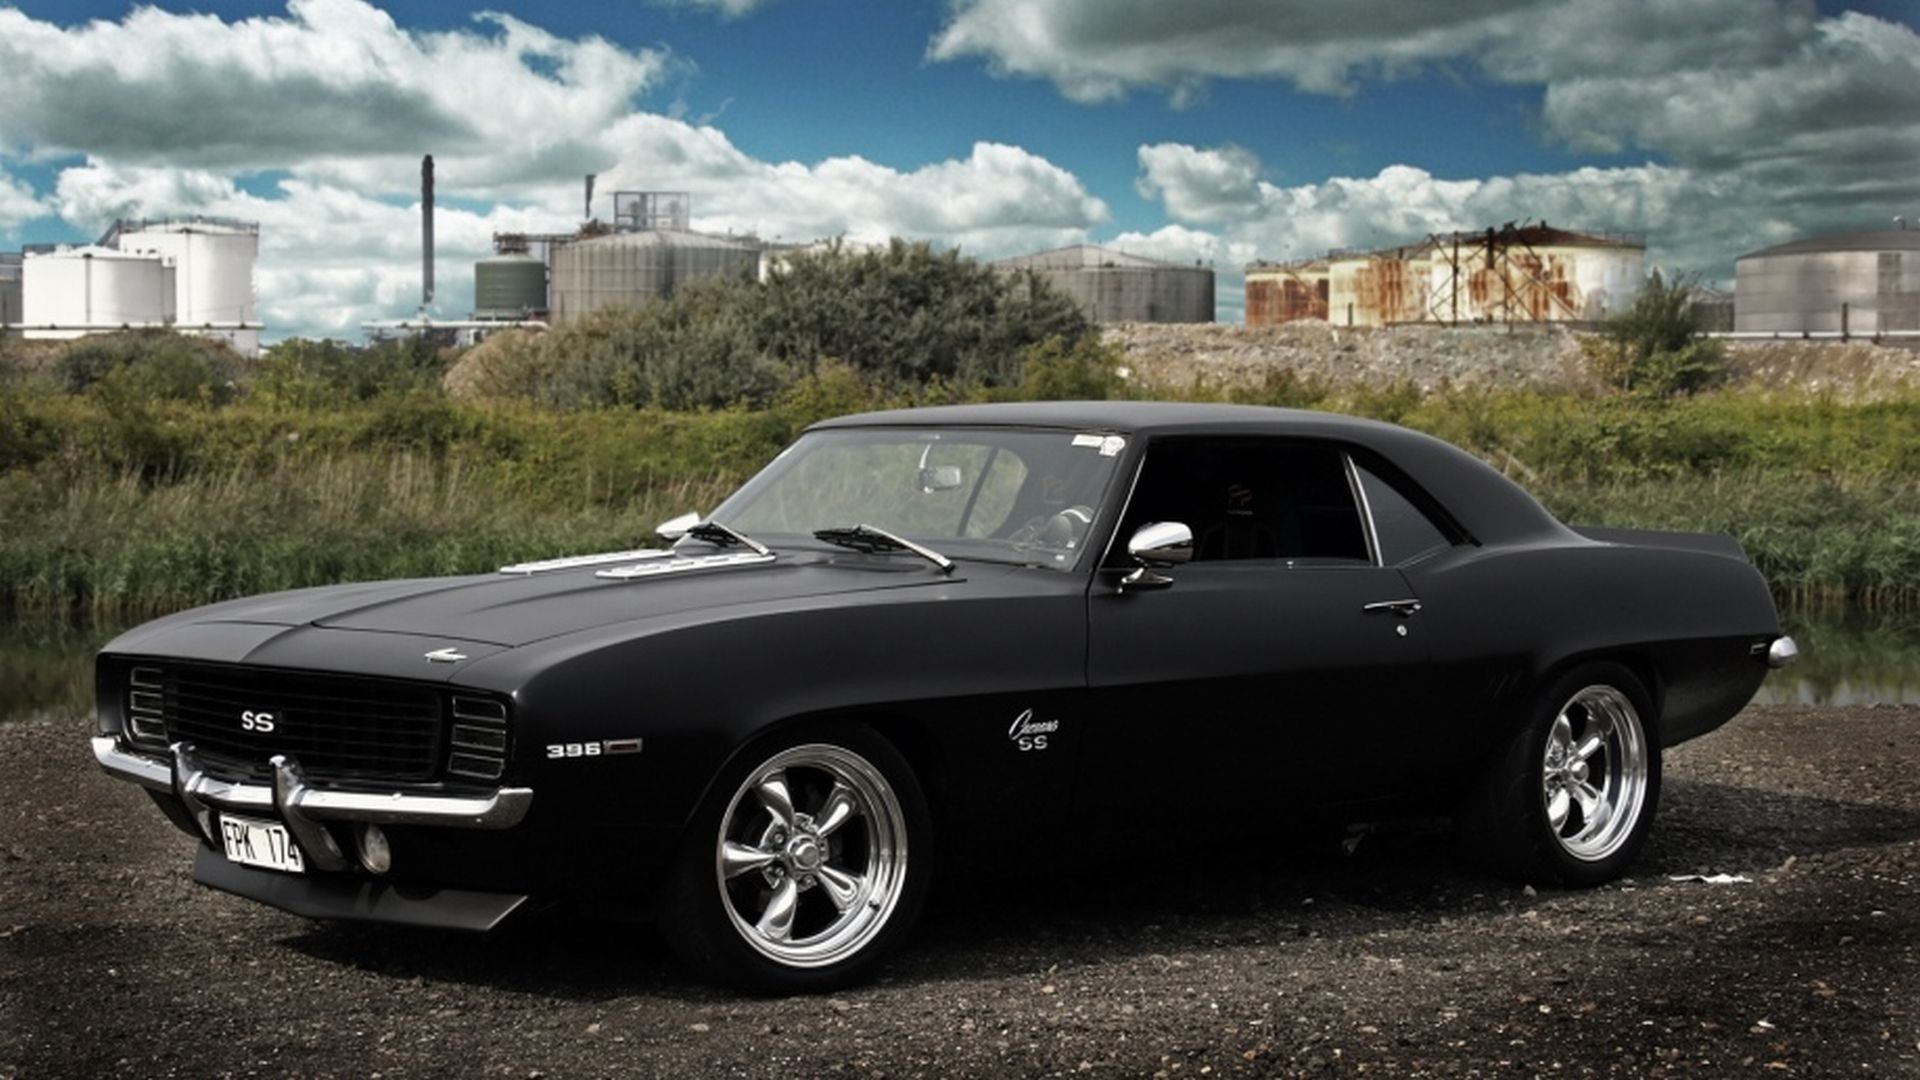 1920x1080 muscle car wallpaper awesome. Â«Â«